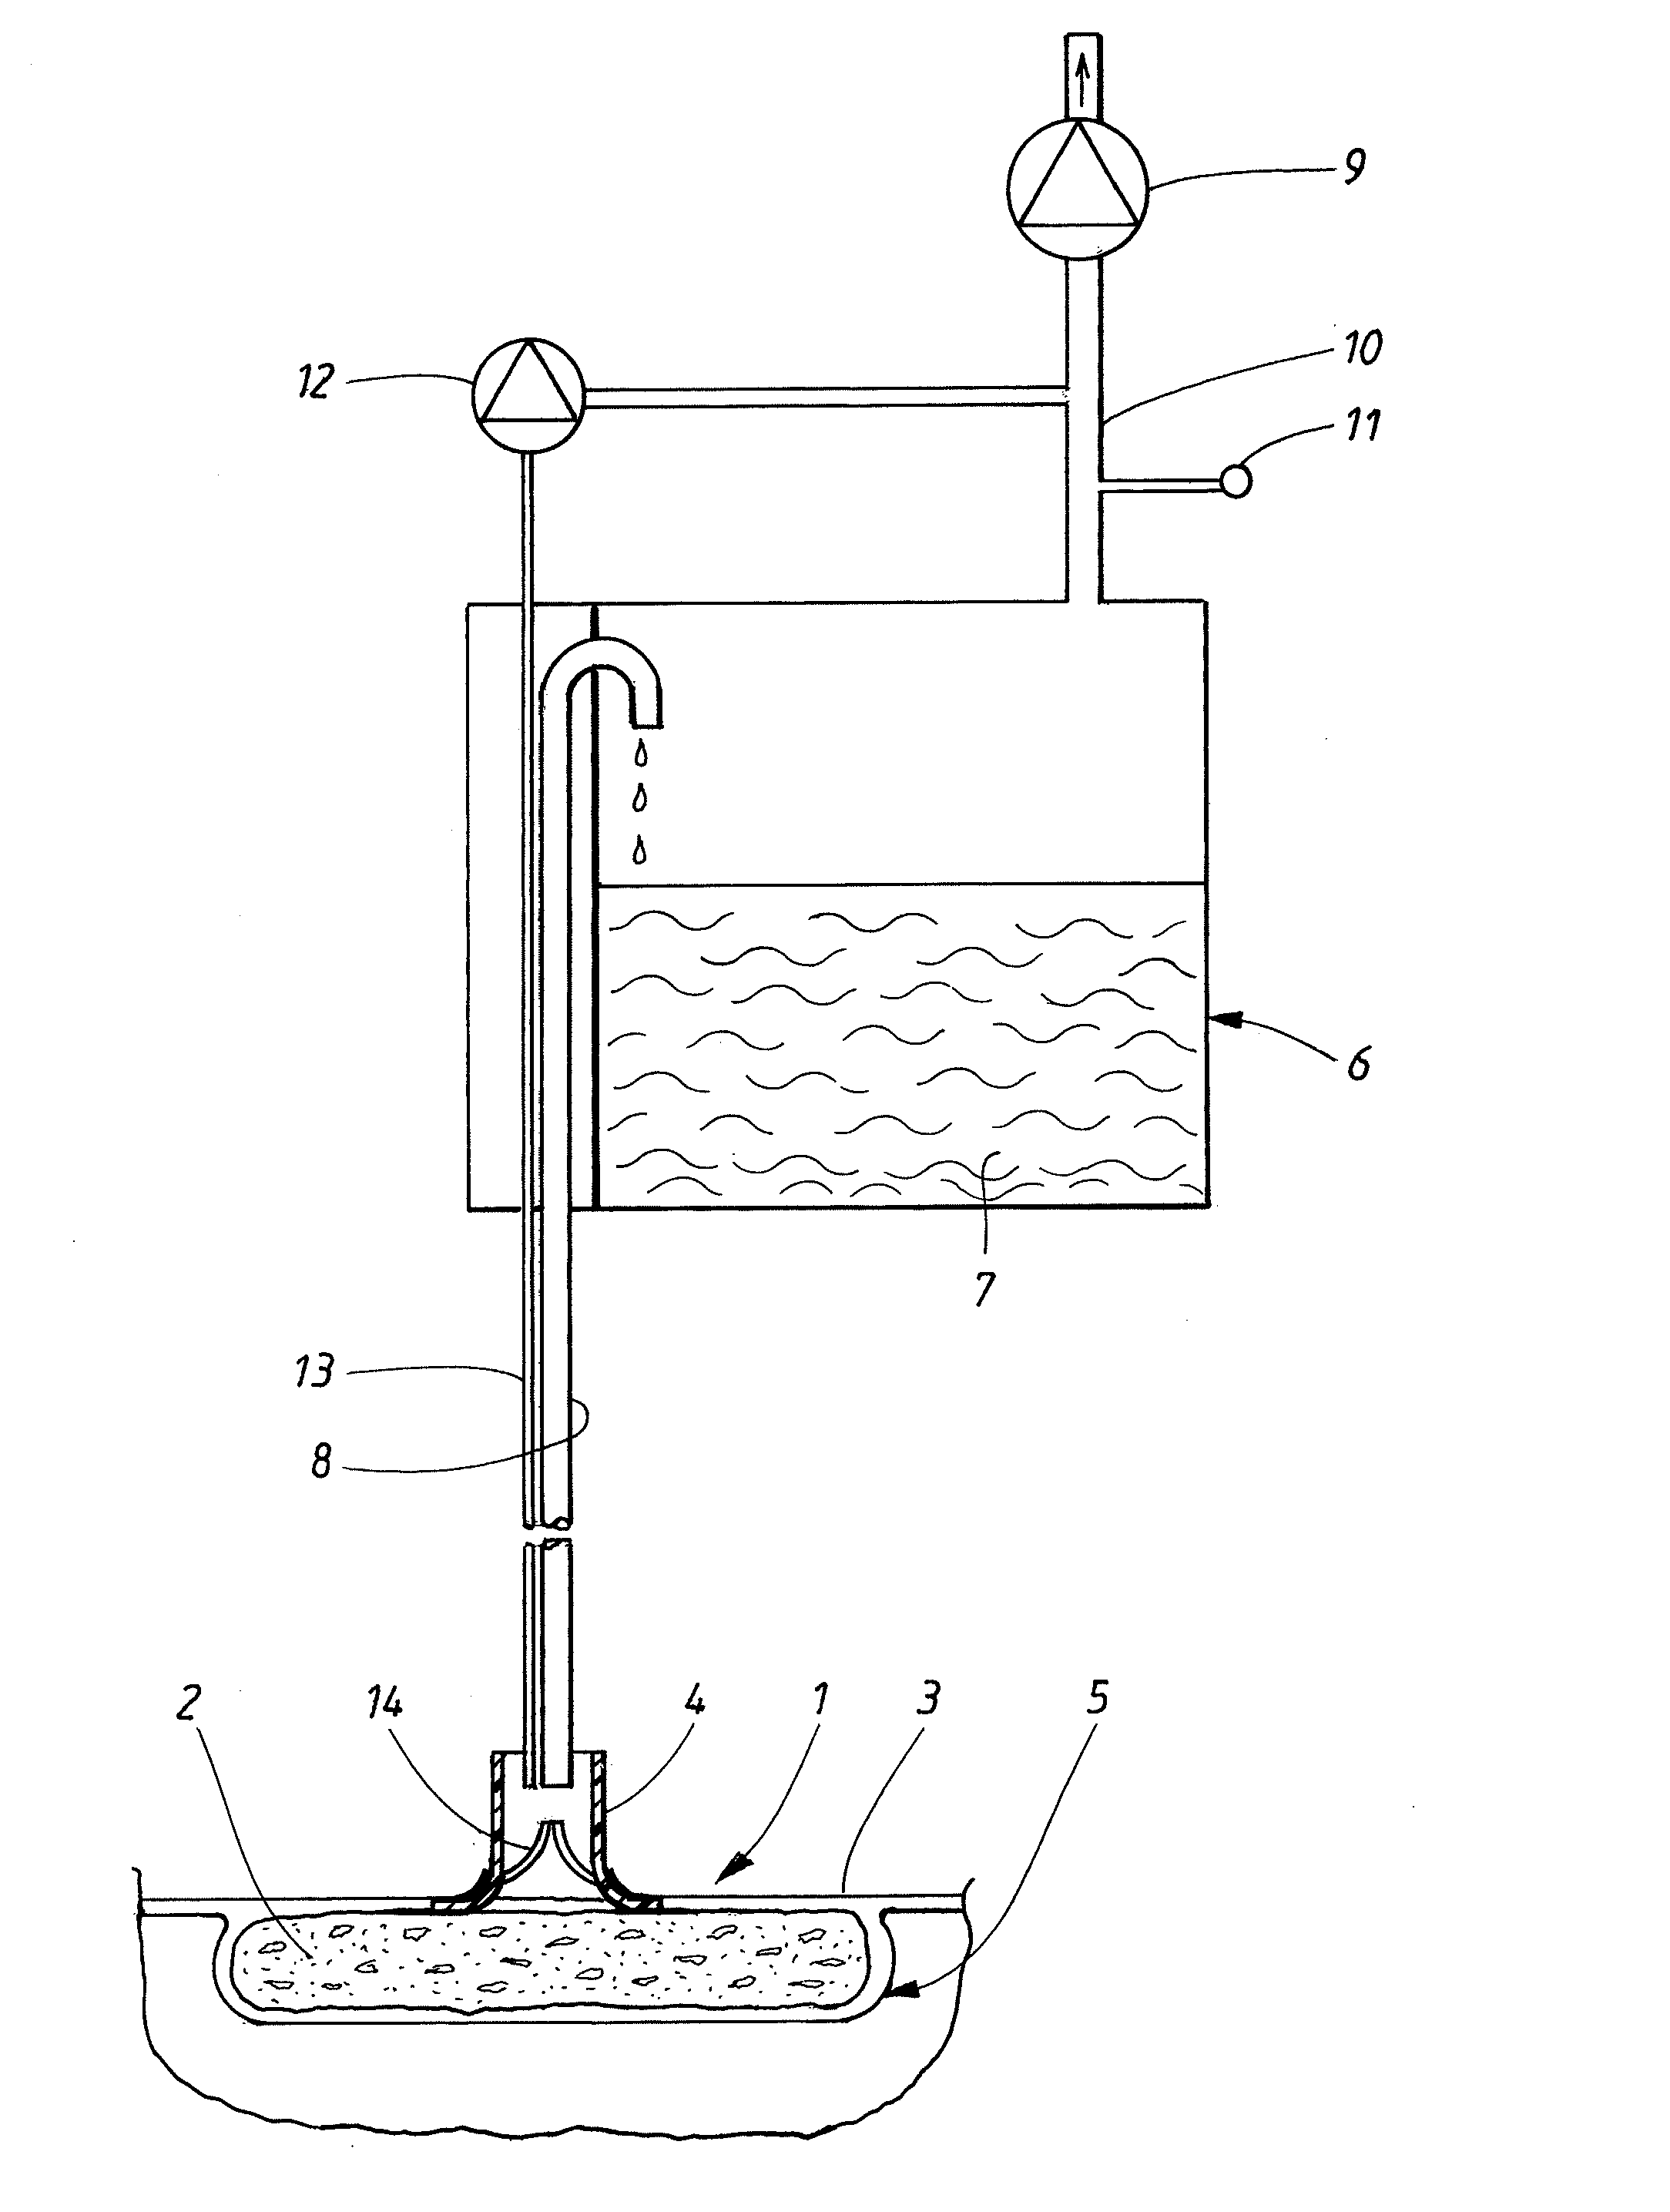 Apparatus and method for controlling the negative pressure in a wound